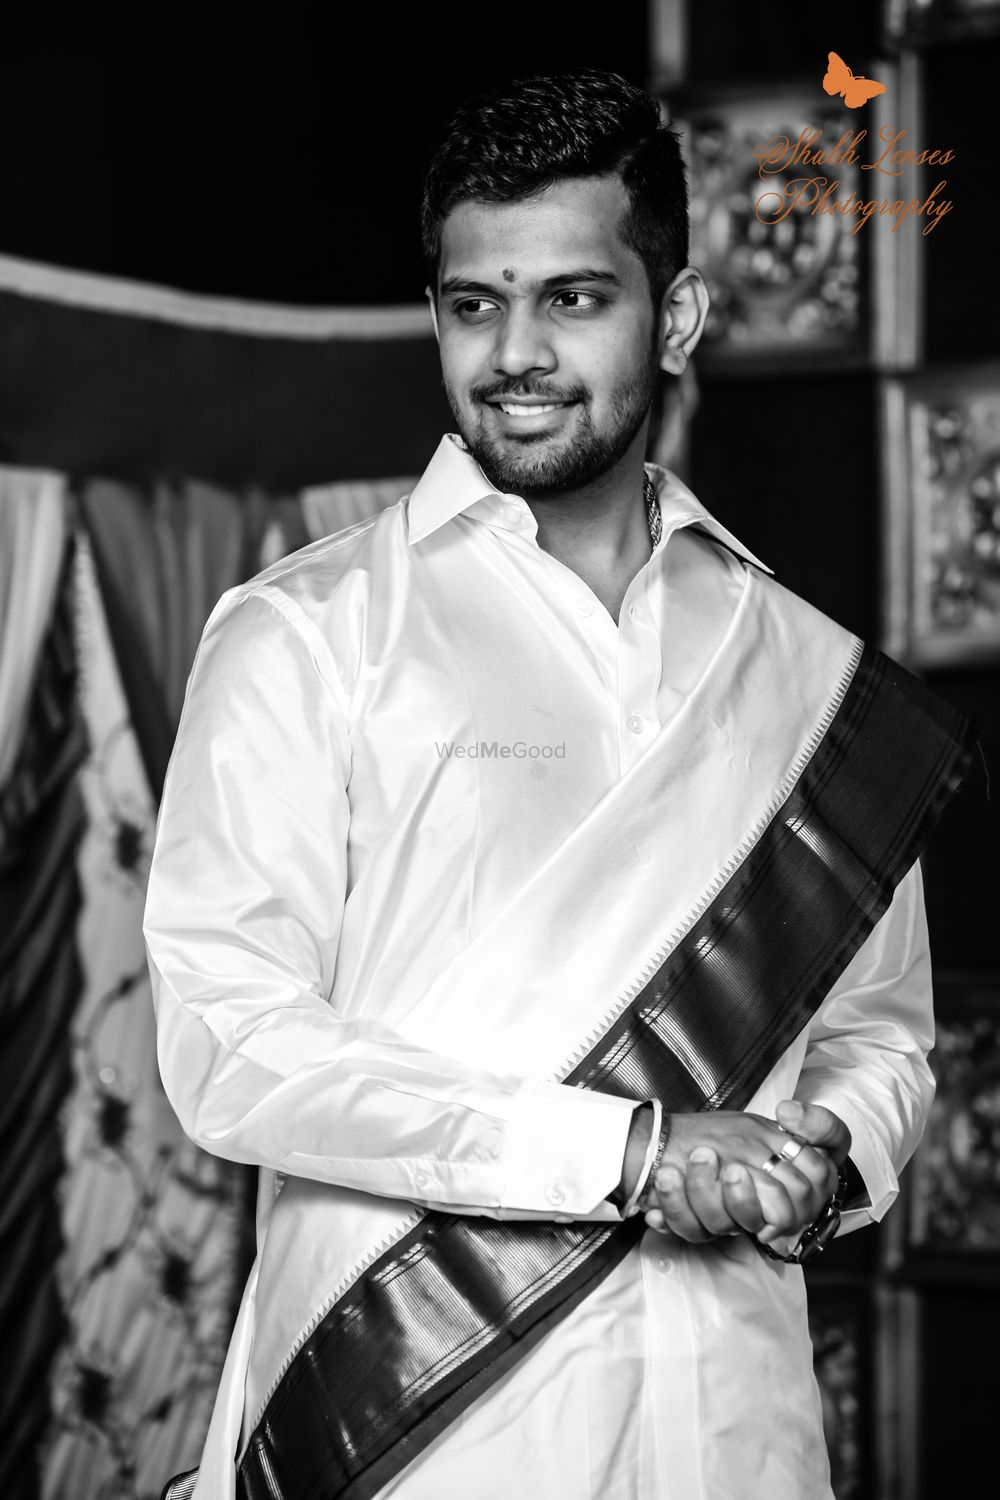 Photo From Intimate Wedding (lockdown) - By Shubh Lenses Photography